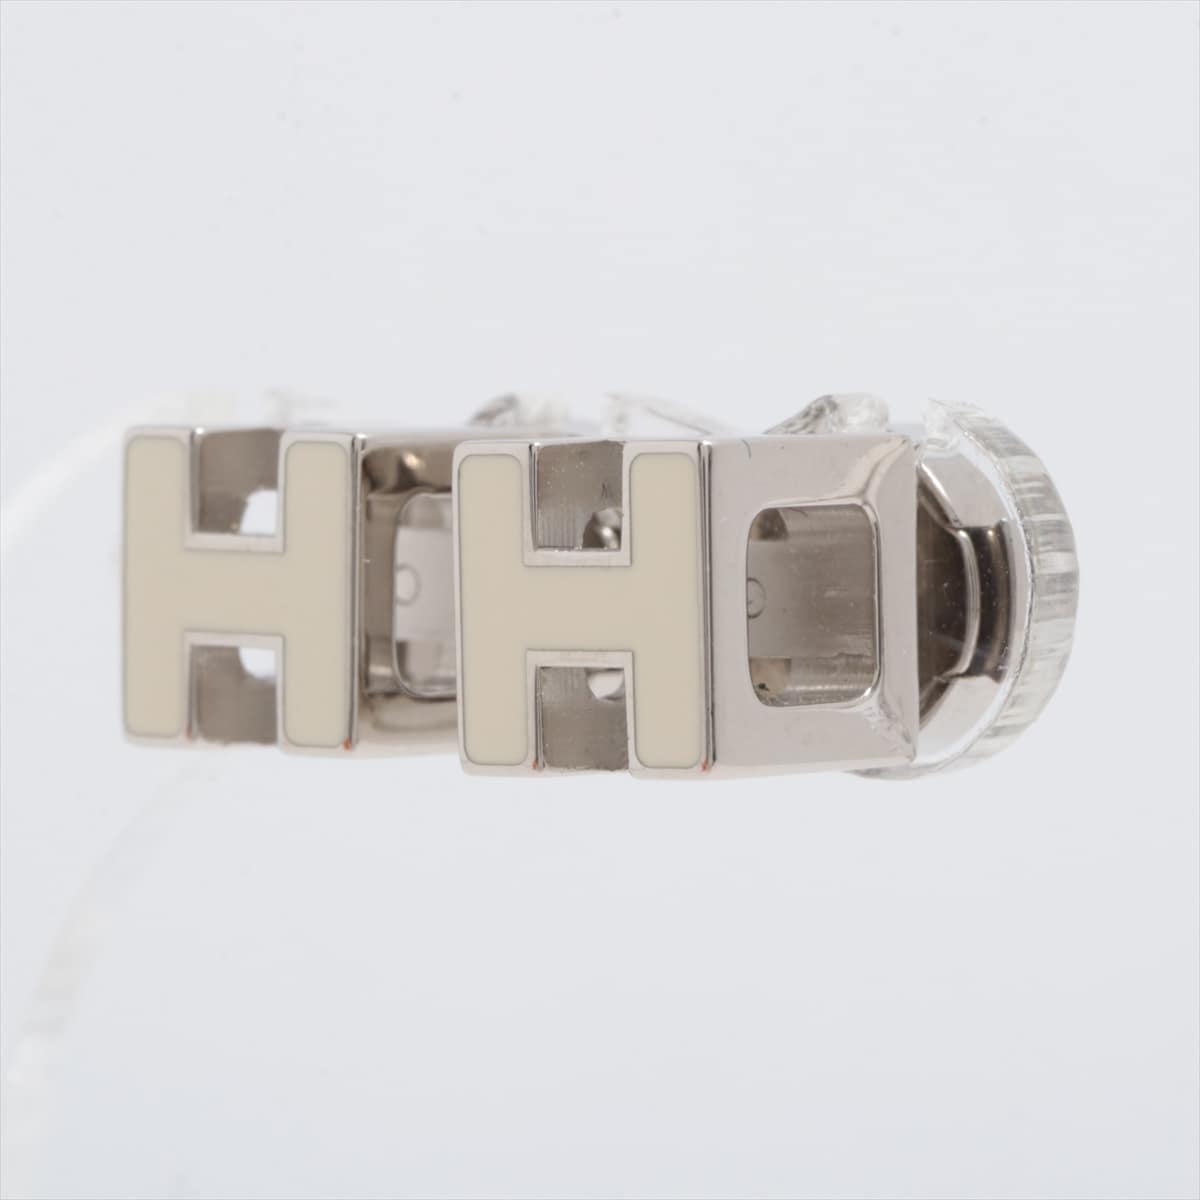 Hermès Courage Ache H Cube Piercing jewelry (for both ears) GP Silver